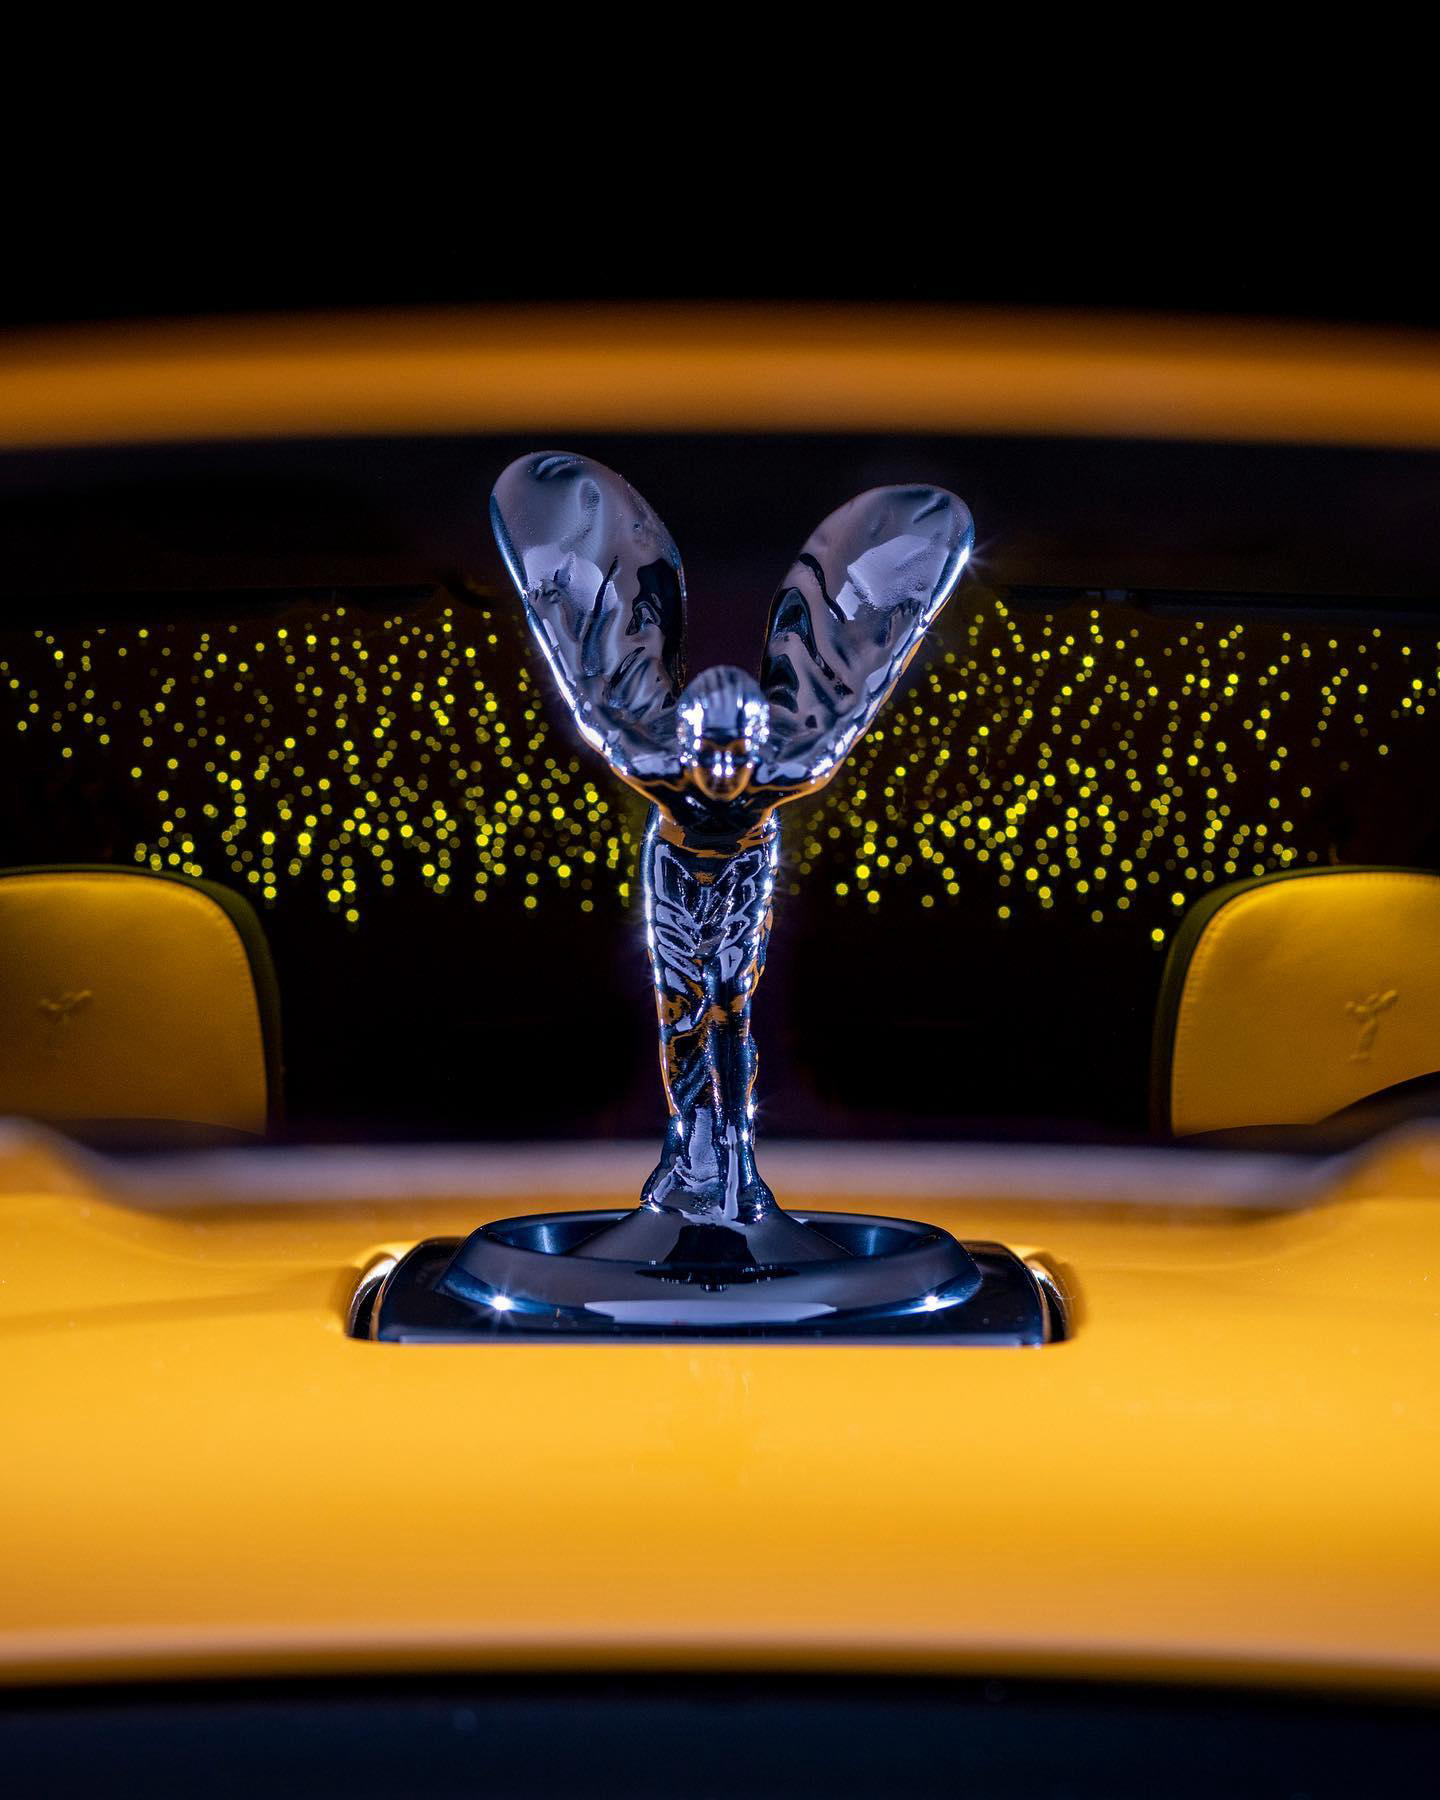 image  1 Rolls-Royce Motor Cars - A sparkling muse and stellar adornment, the #SpiritofEcstasy ushers in the